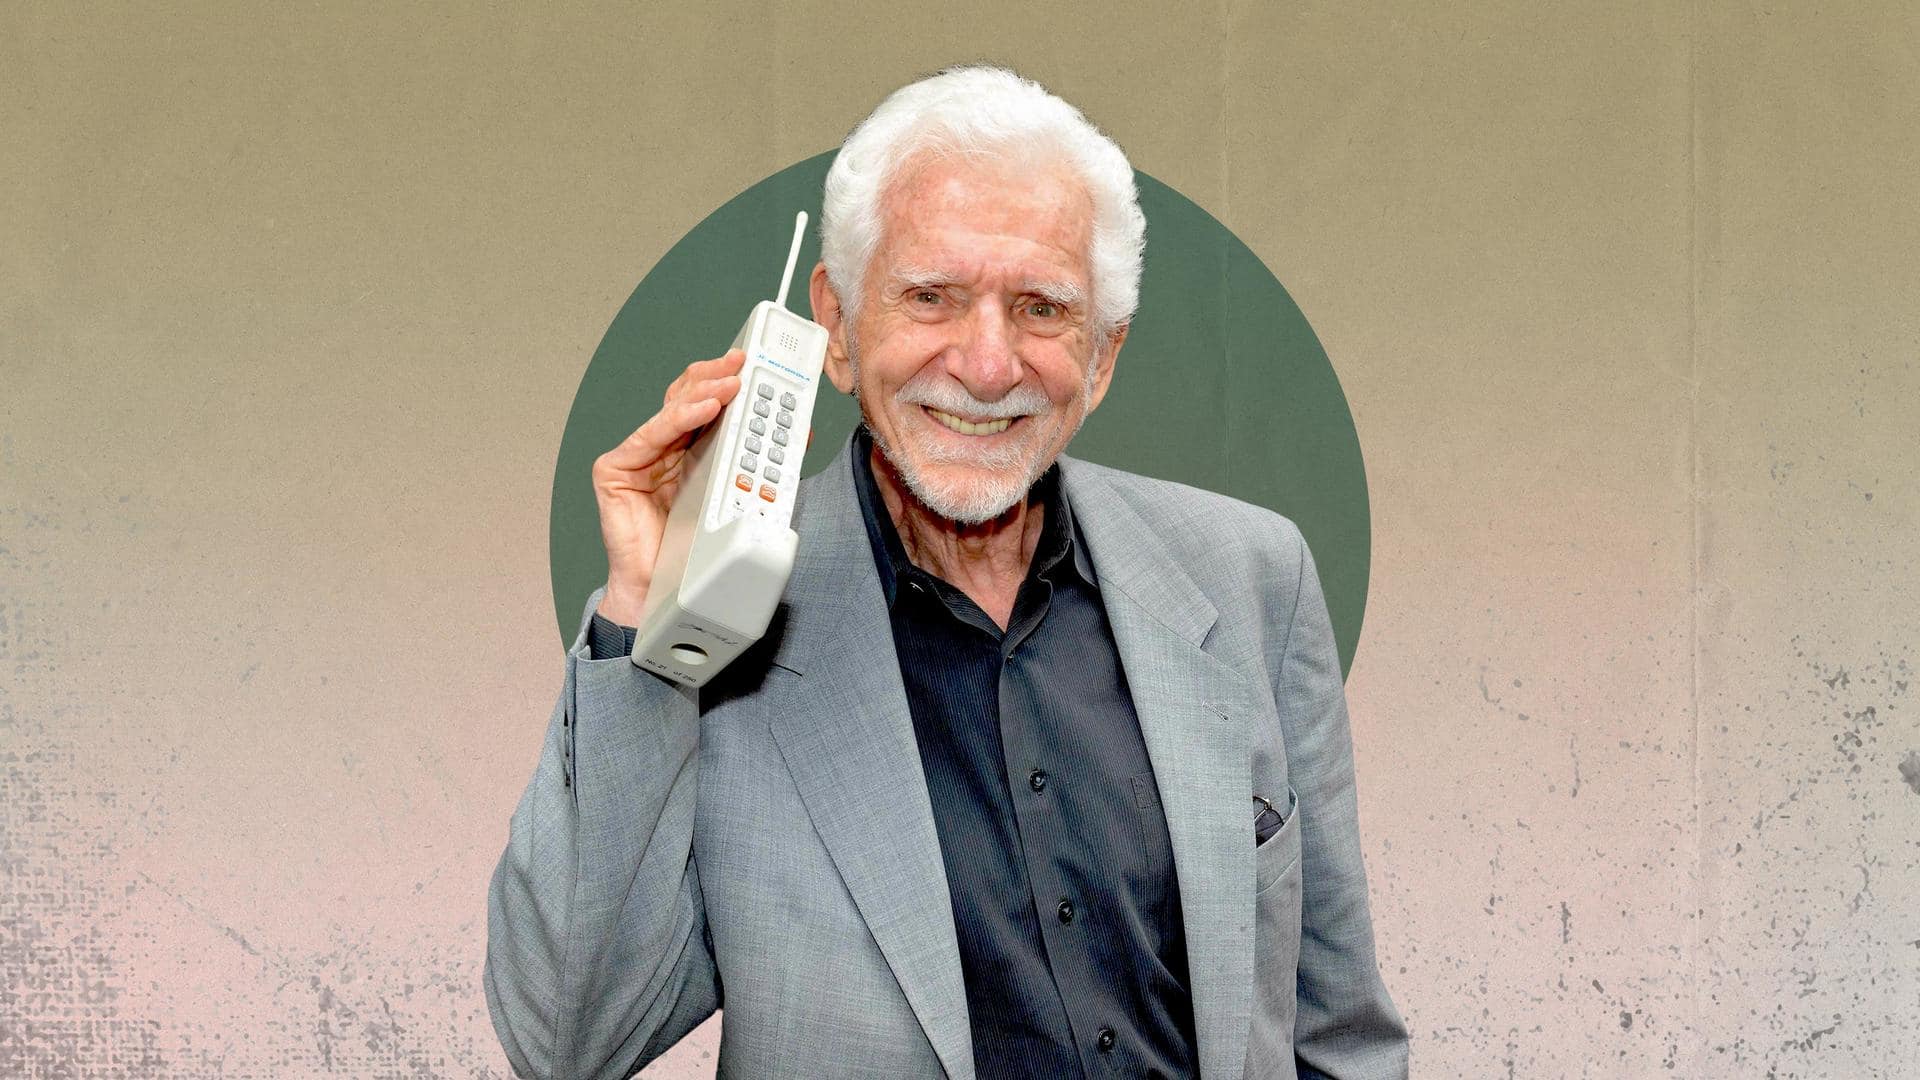 50 years ago today, first mobile phone call was made